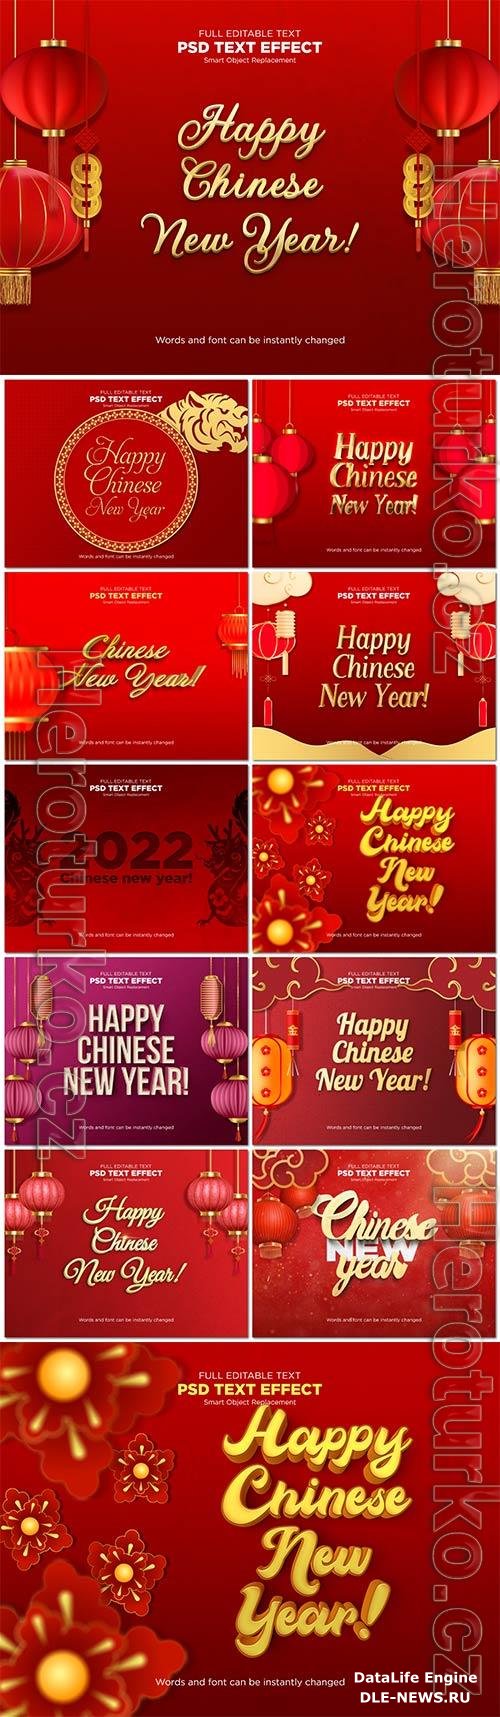 Chinese 2022 new year text effect psd